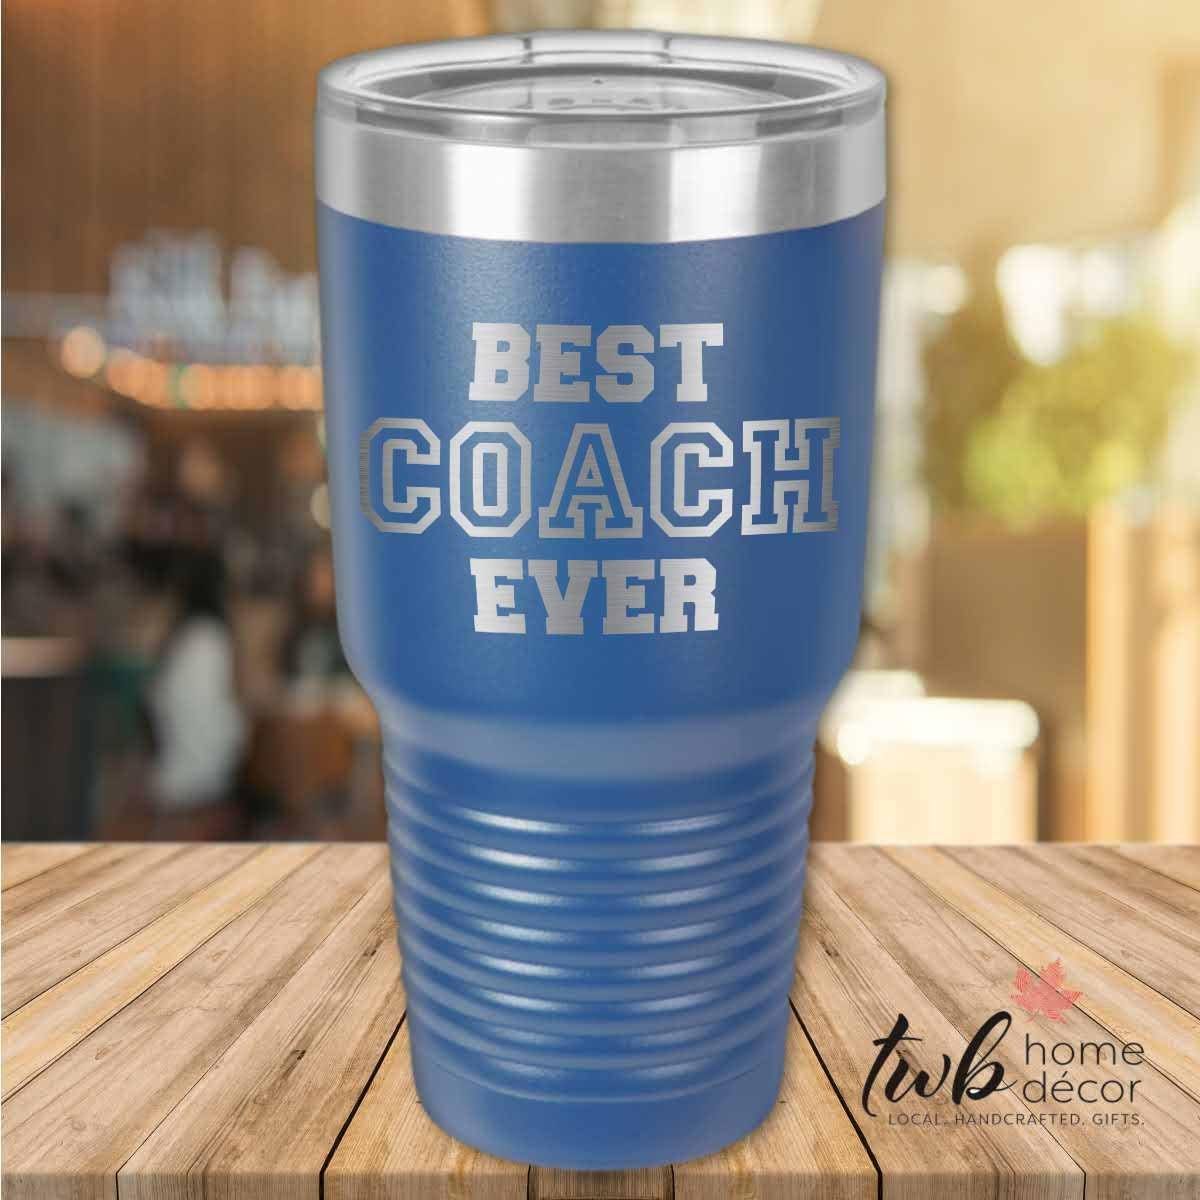 Best Coach Ever Thermal - TWB Home Decor